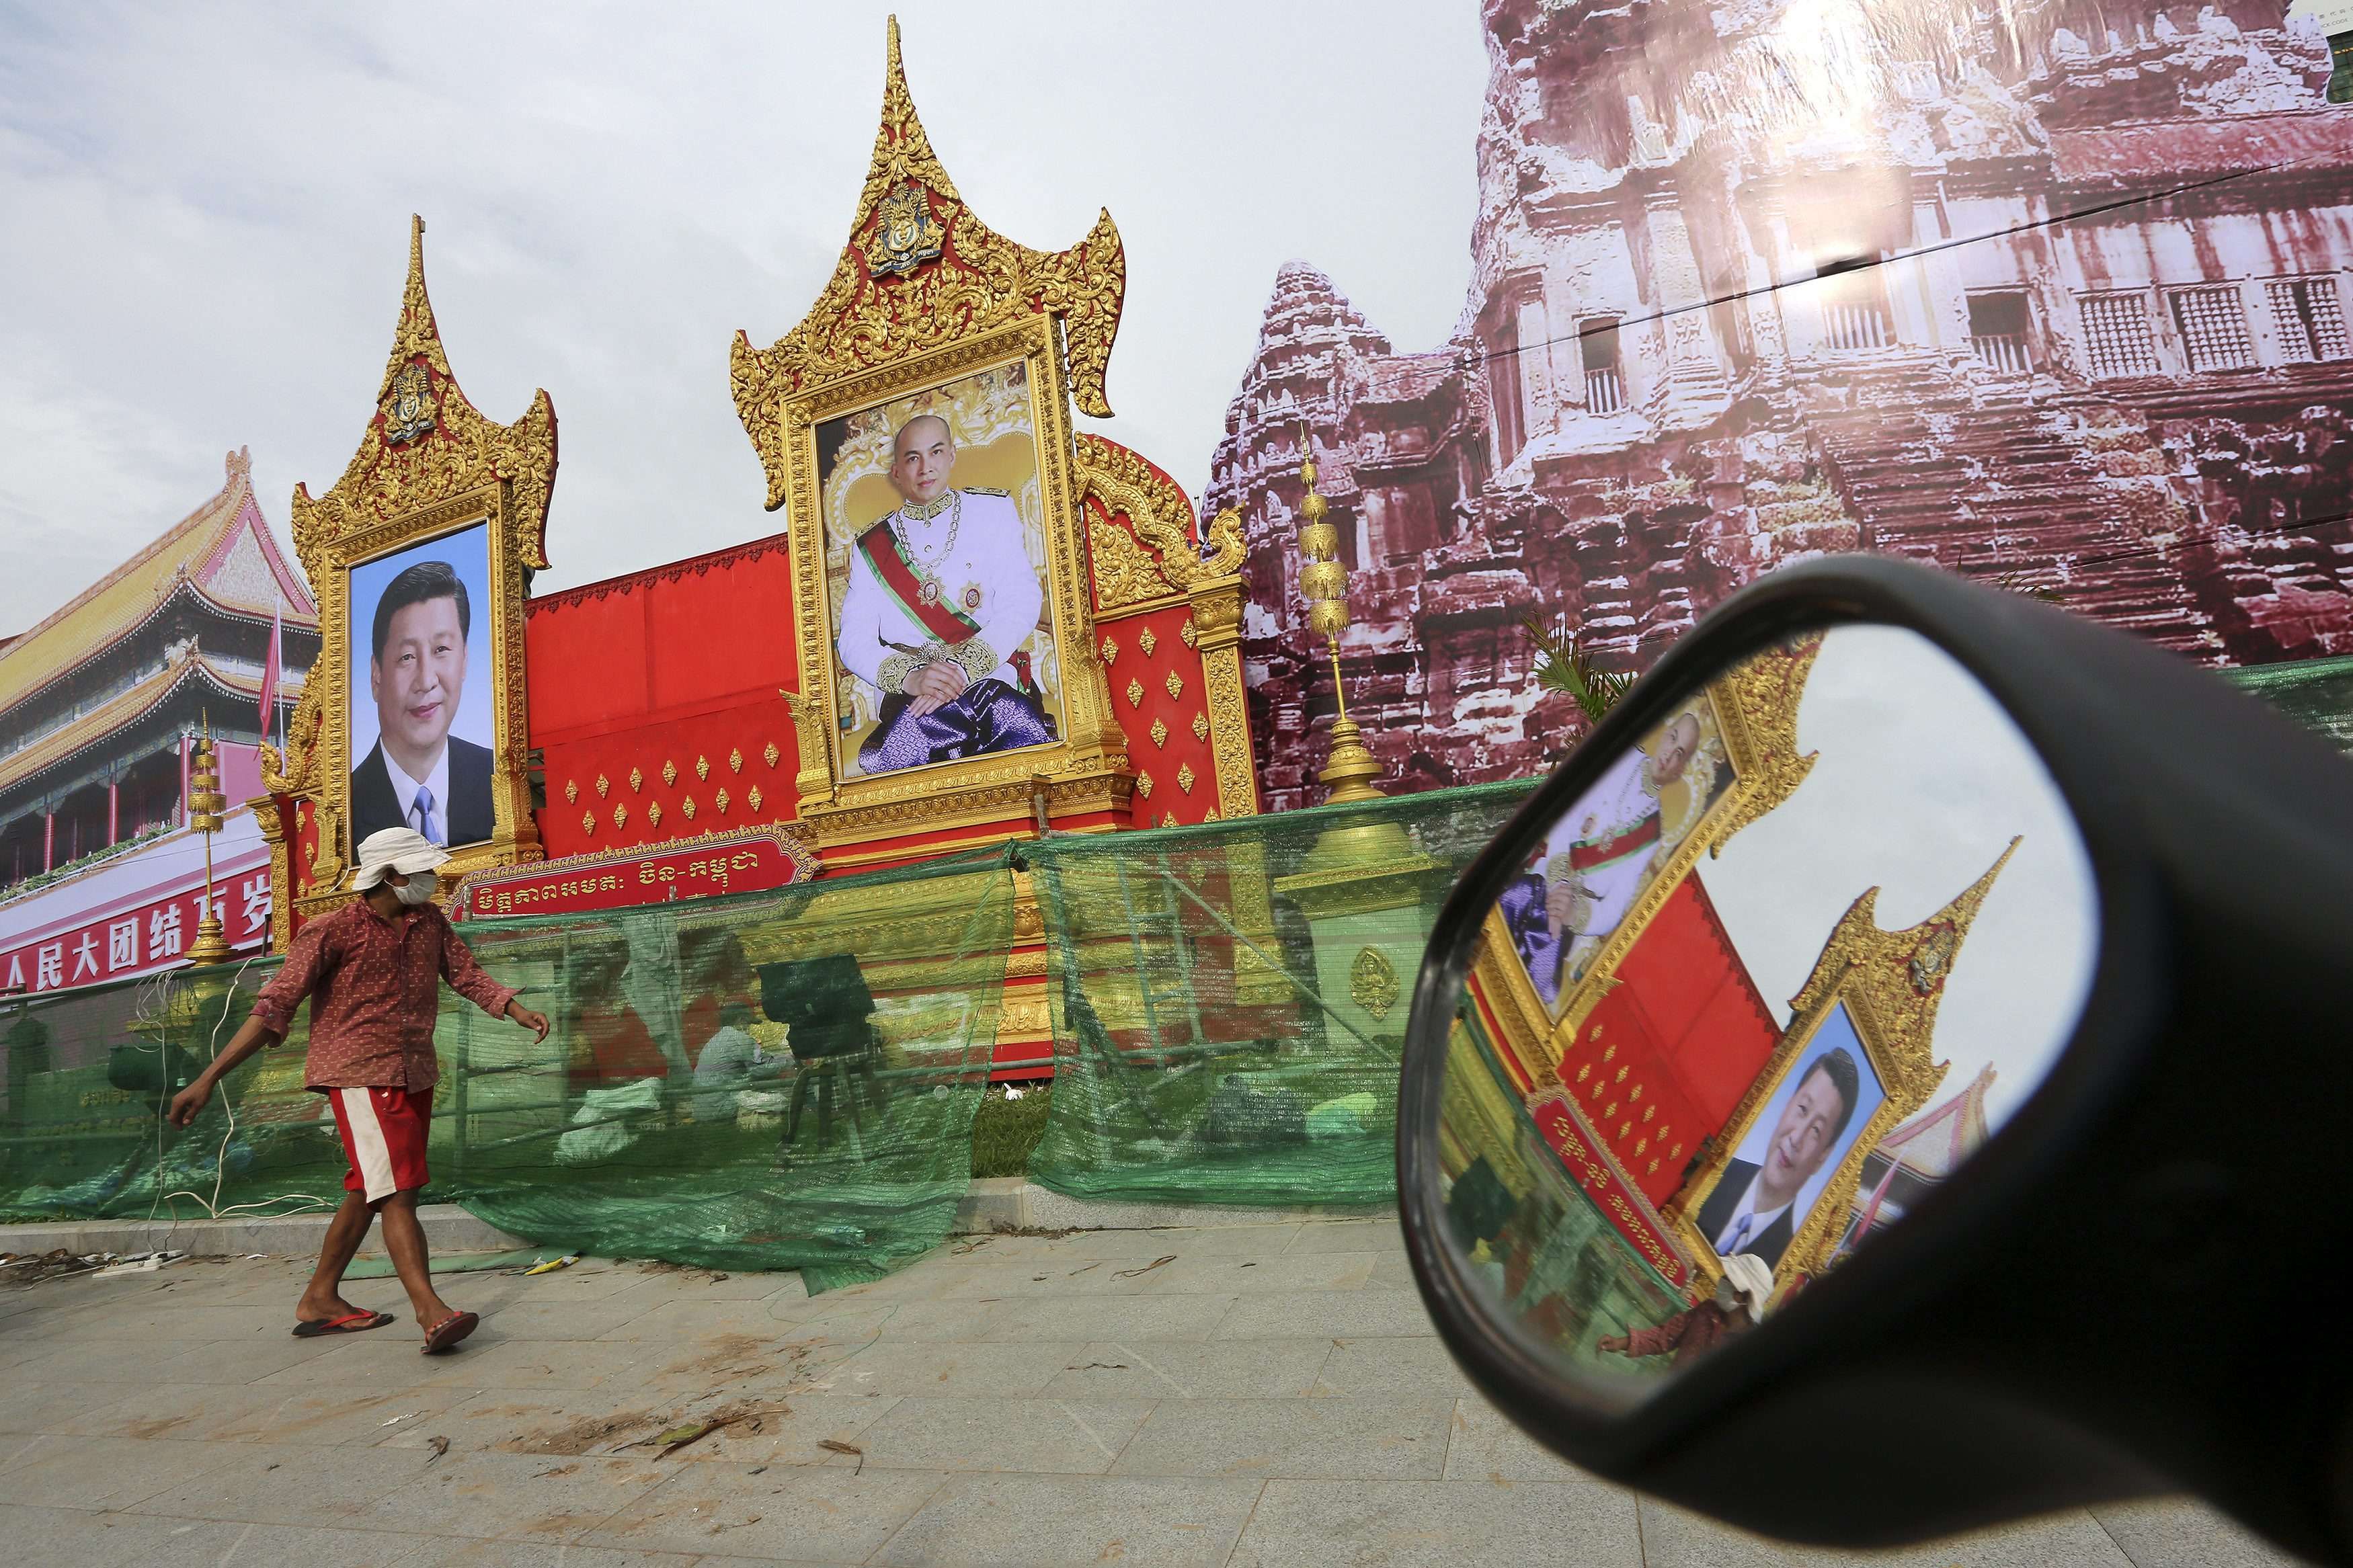 A Cambodian passes portraits of Chinese President Xi Jinping and Cambodian King Norodom Sihamoni in Phnom Penh, Cambodia ahead of Xi’s visit. Photo: EPA